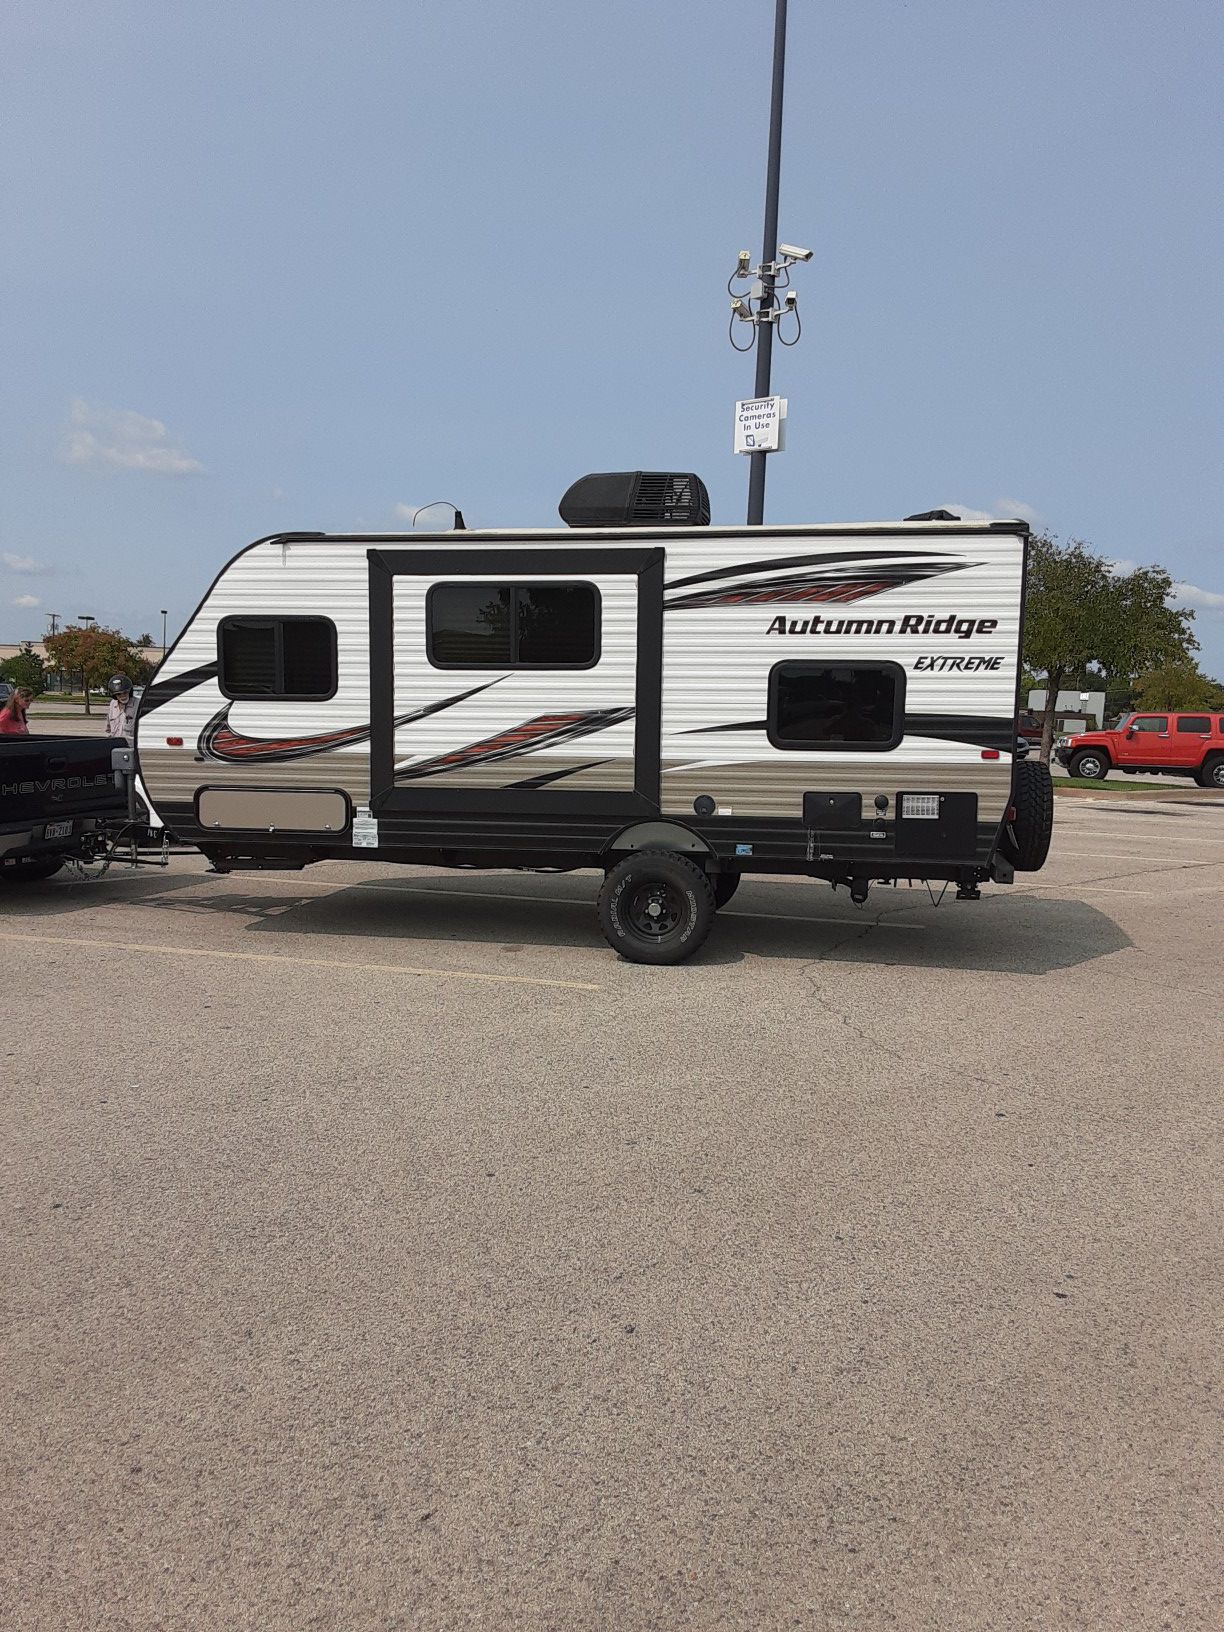 2018 starcraft autumn ridge outfitters extreme 18bhs 13500 cash